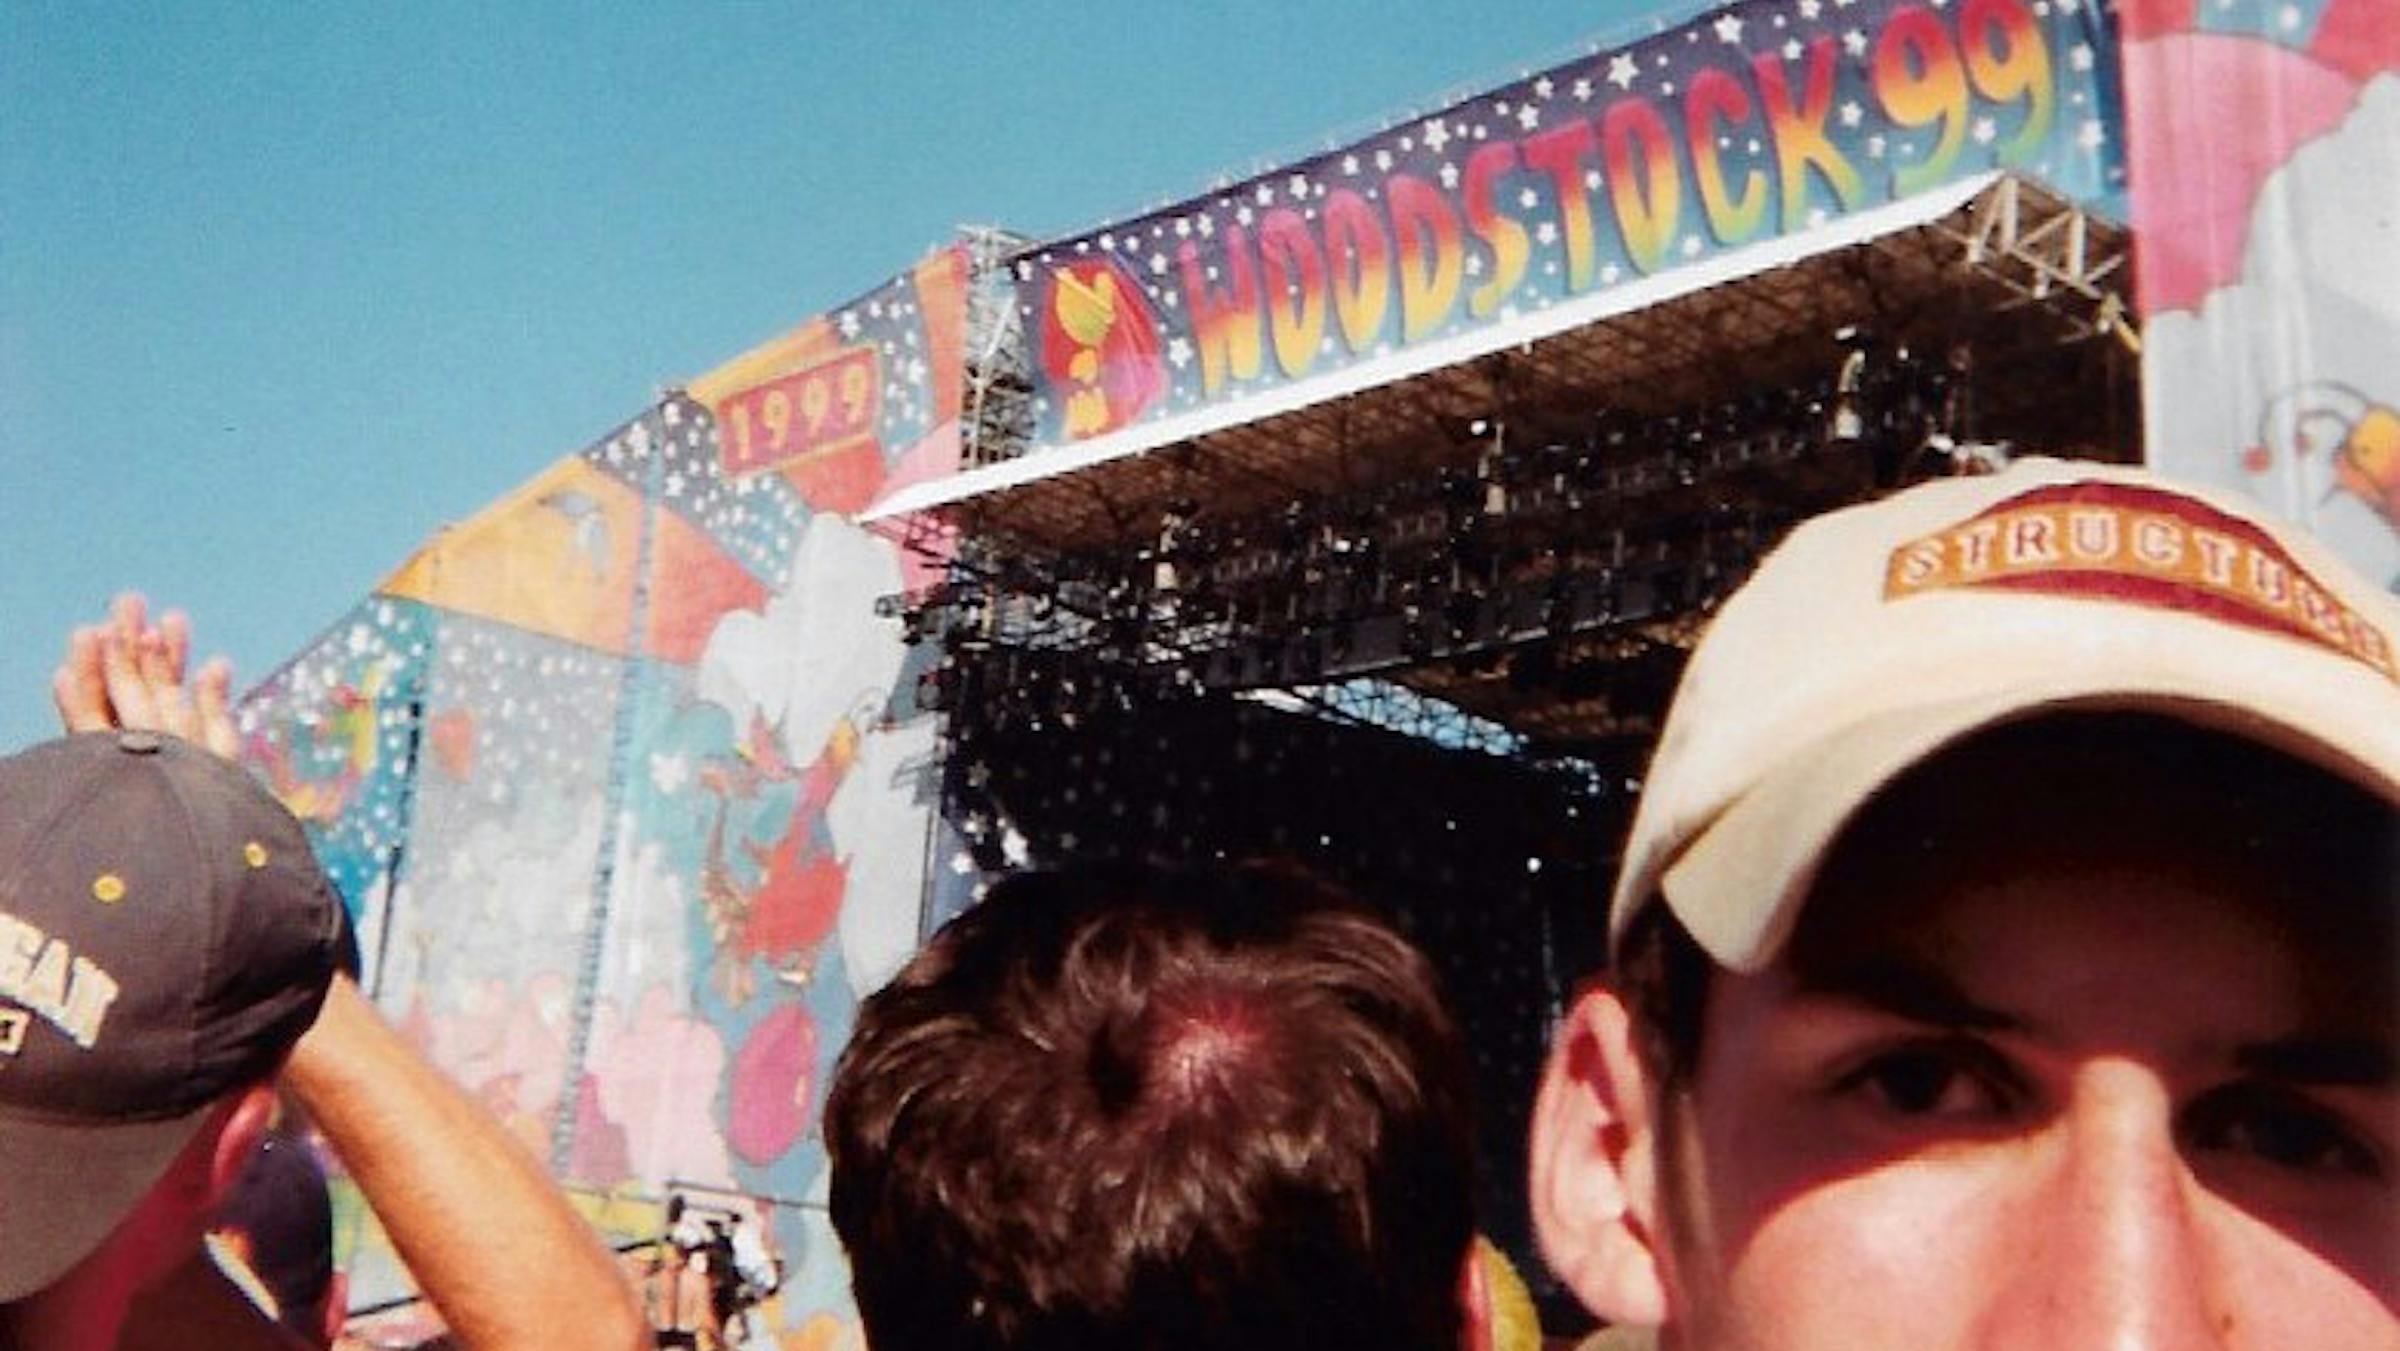 I was at Woodstock ’99 and it destroyed my innocence